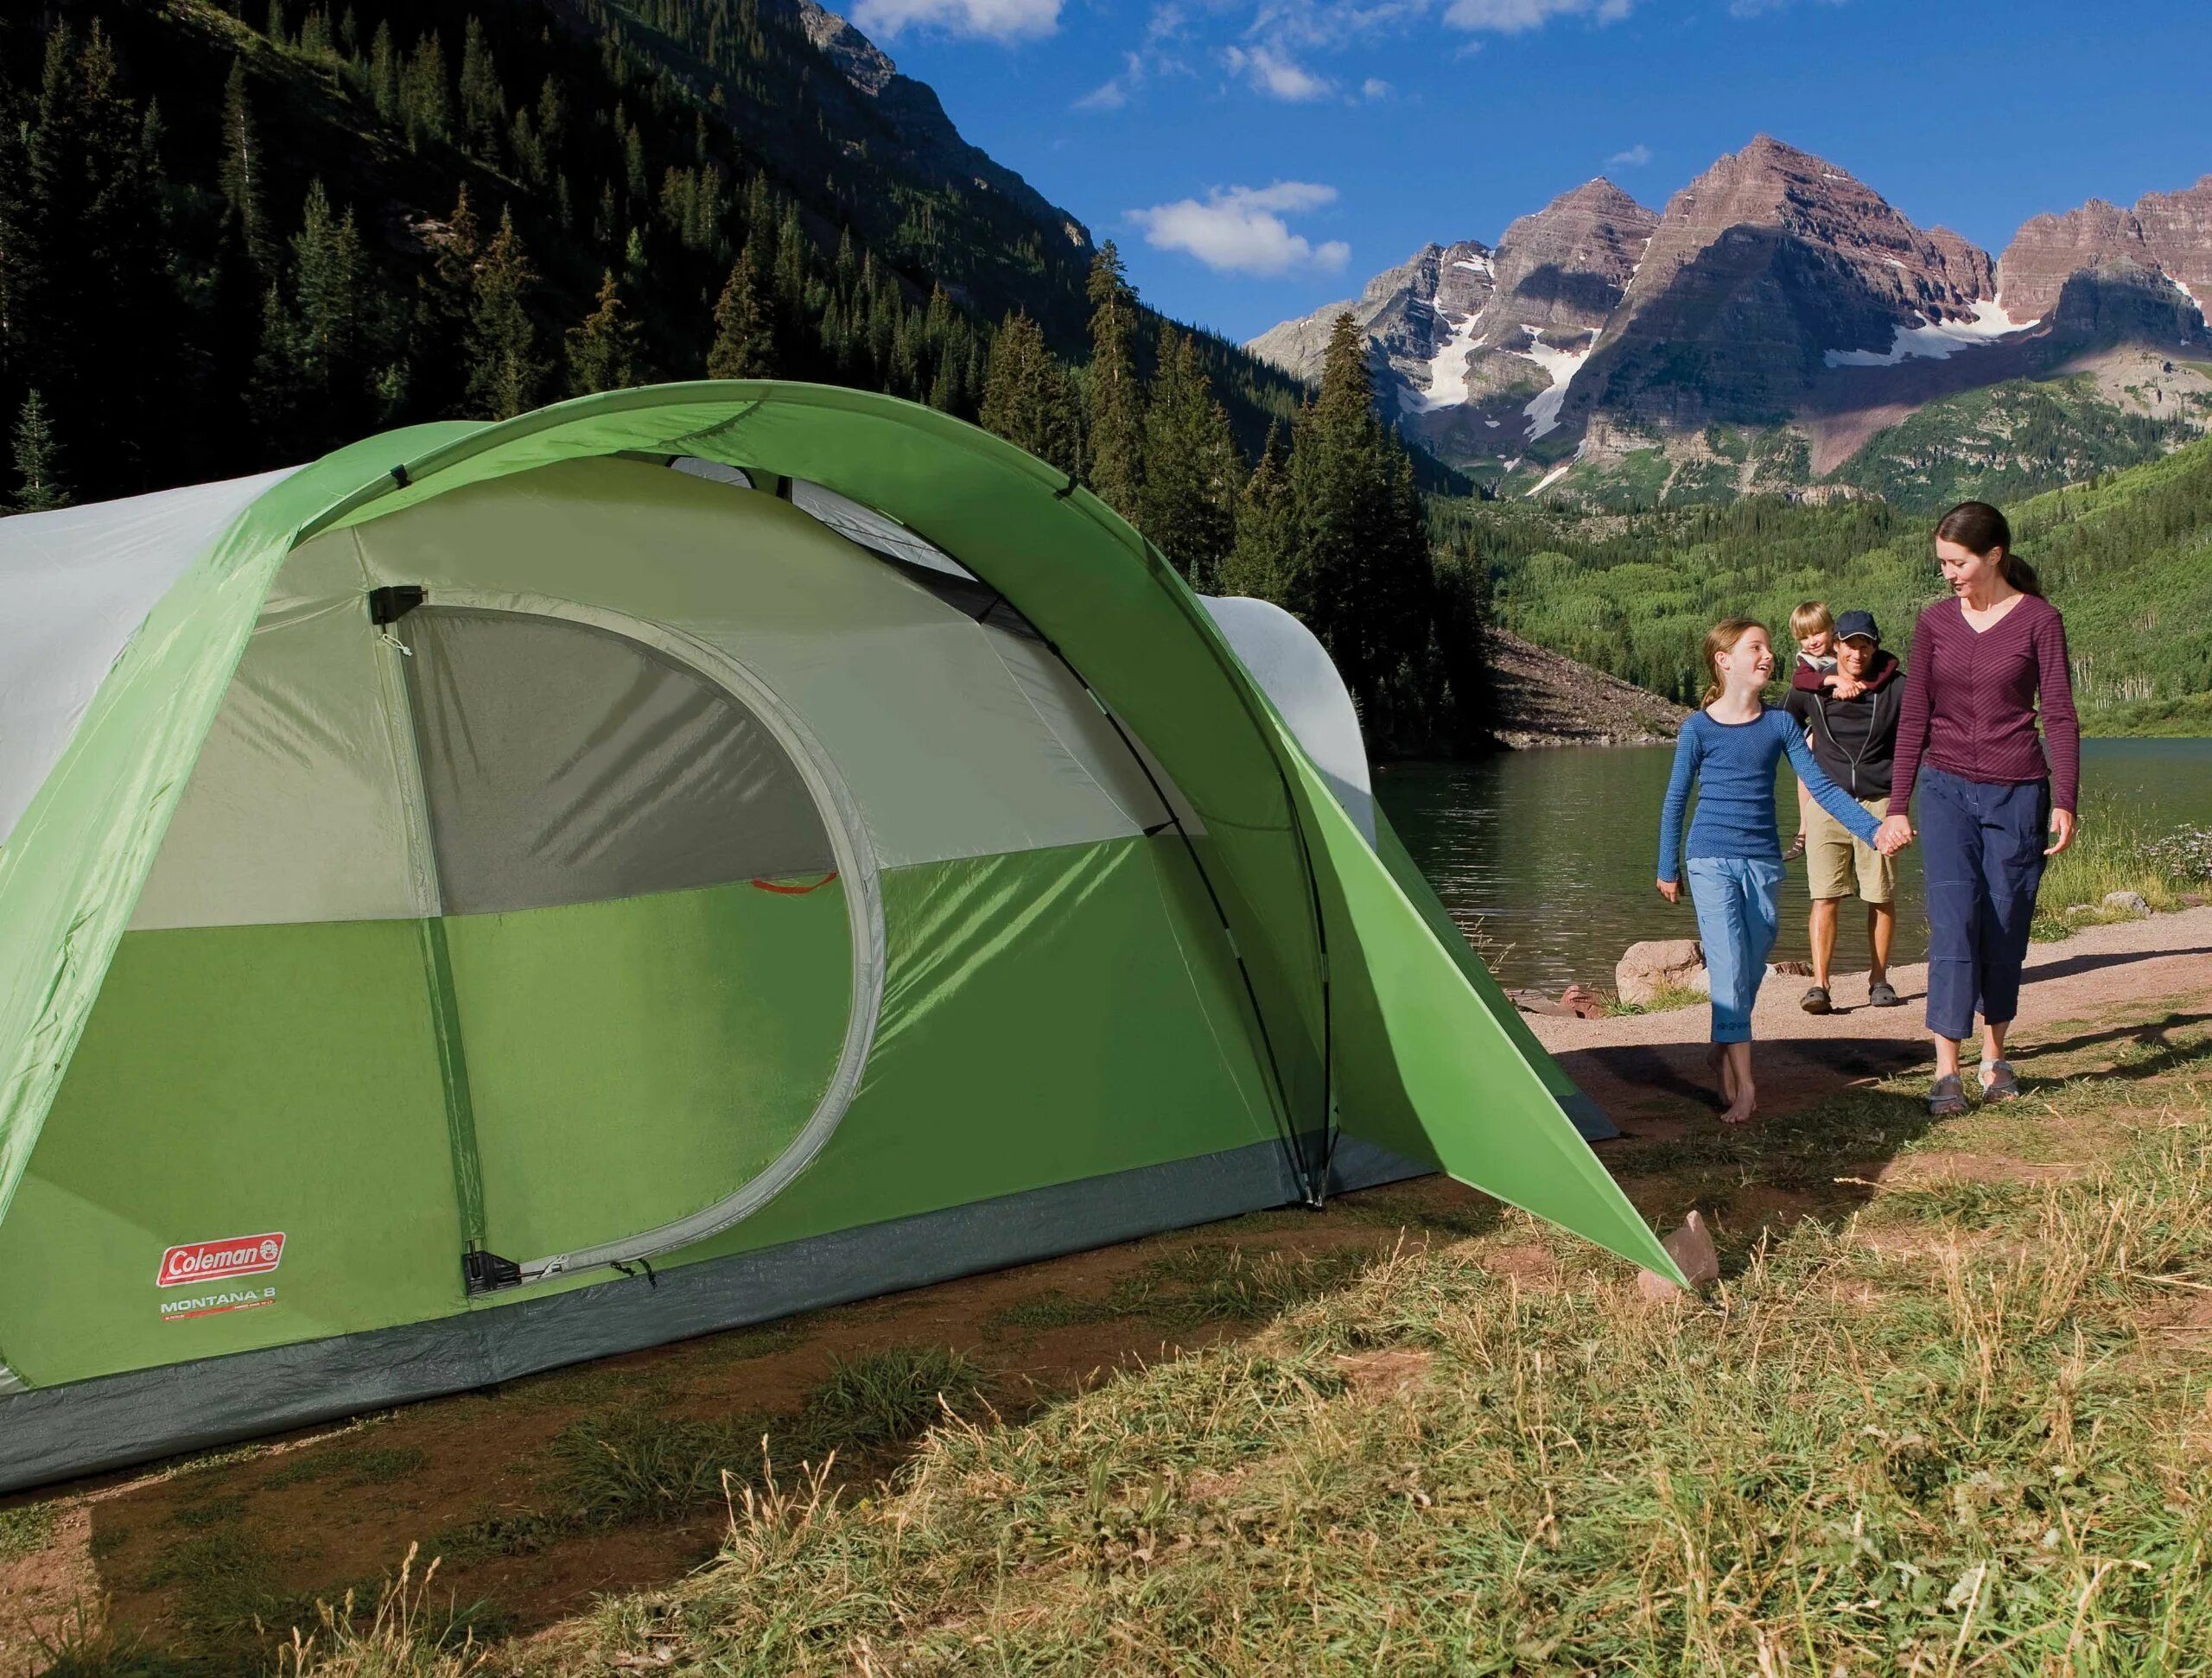 Палатка Coleman Family. Палатка Камп 3 Монтана. Палатка best Camp Montana 4. Coleman Camping Tent. Camping with extend